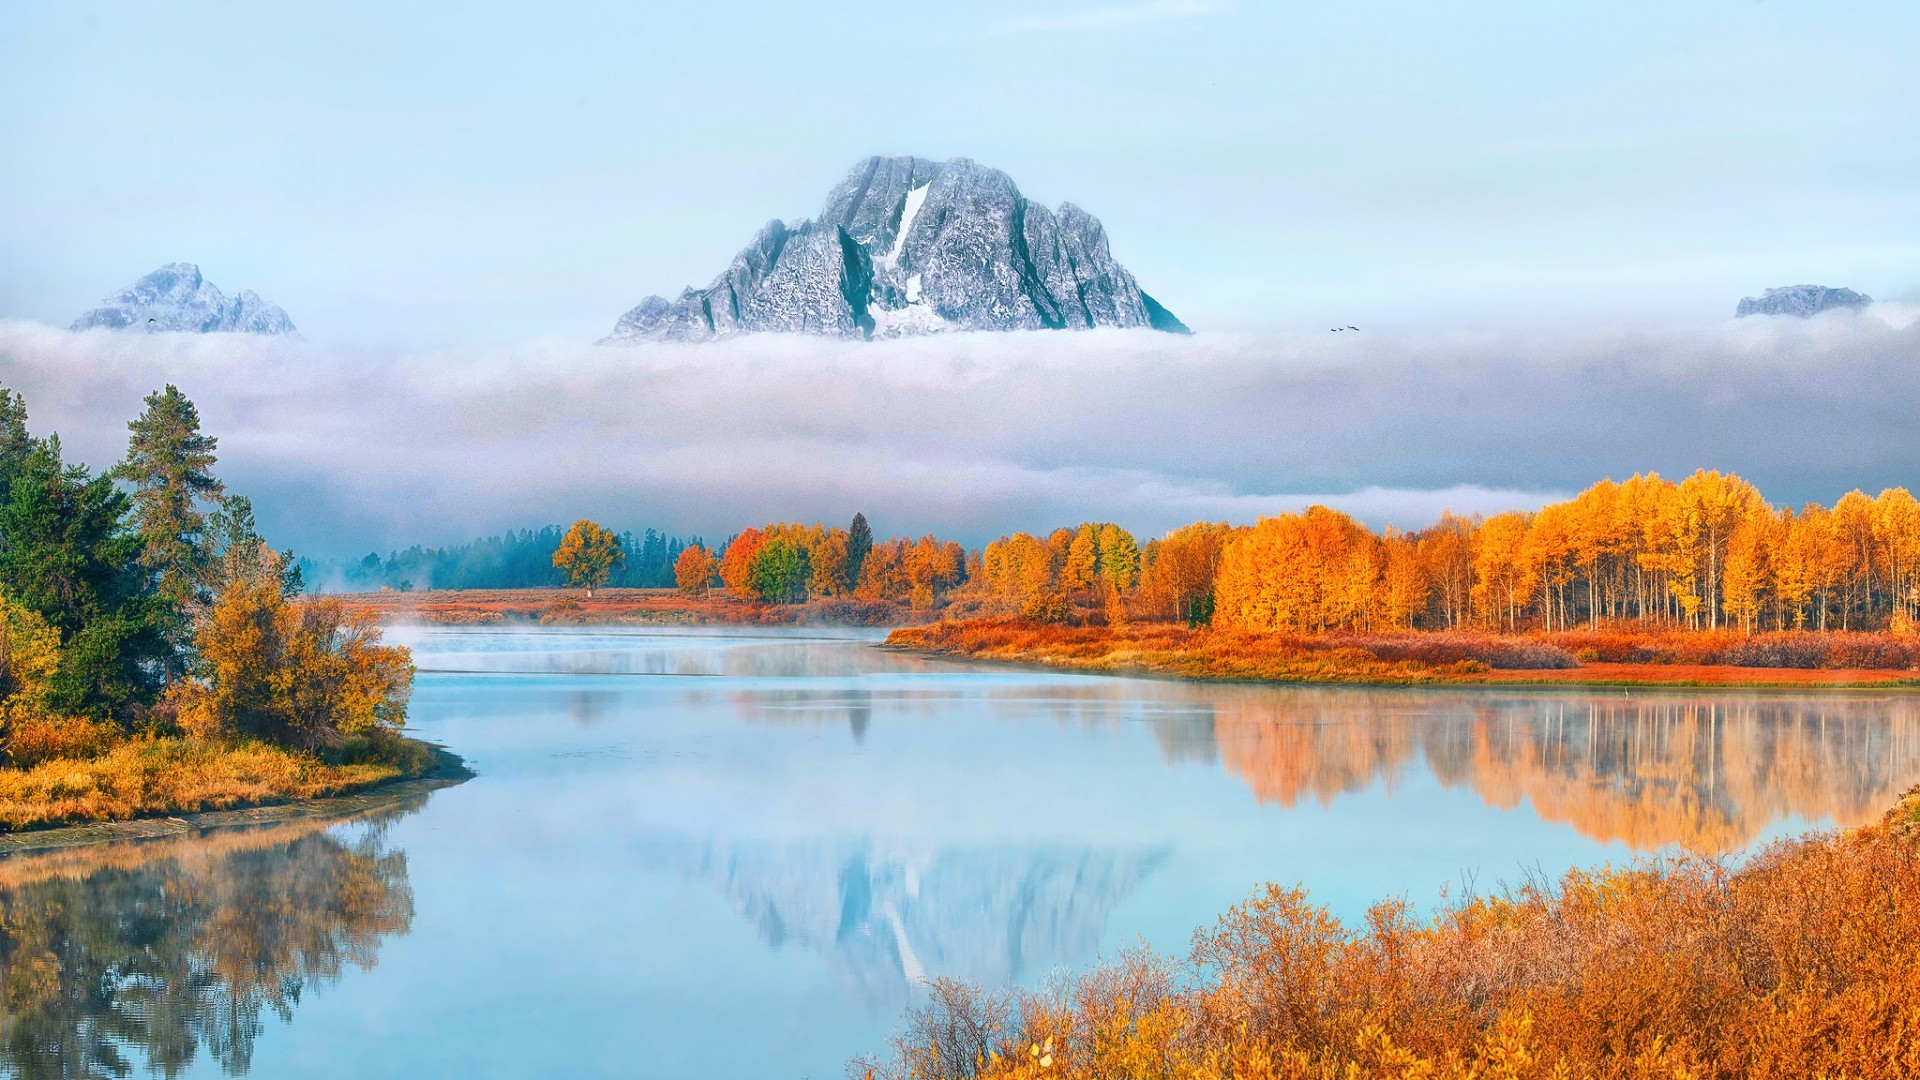 General 1920x1080 nature landscape water lake reflection mountains trees clouds snow mist fall